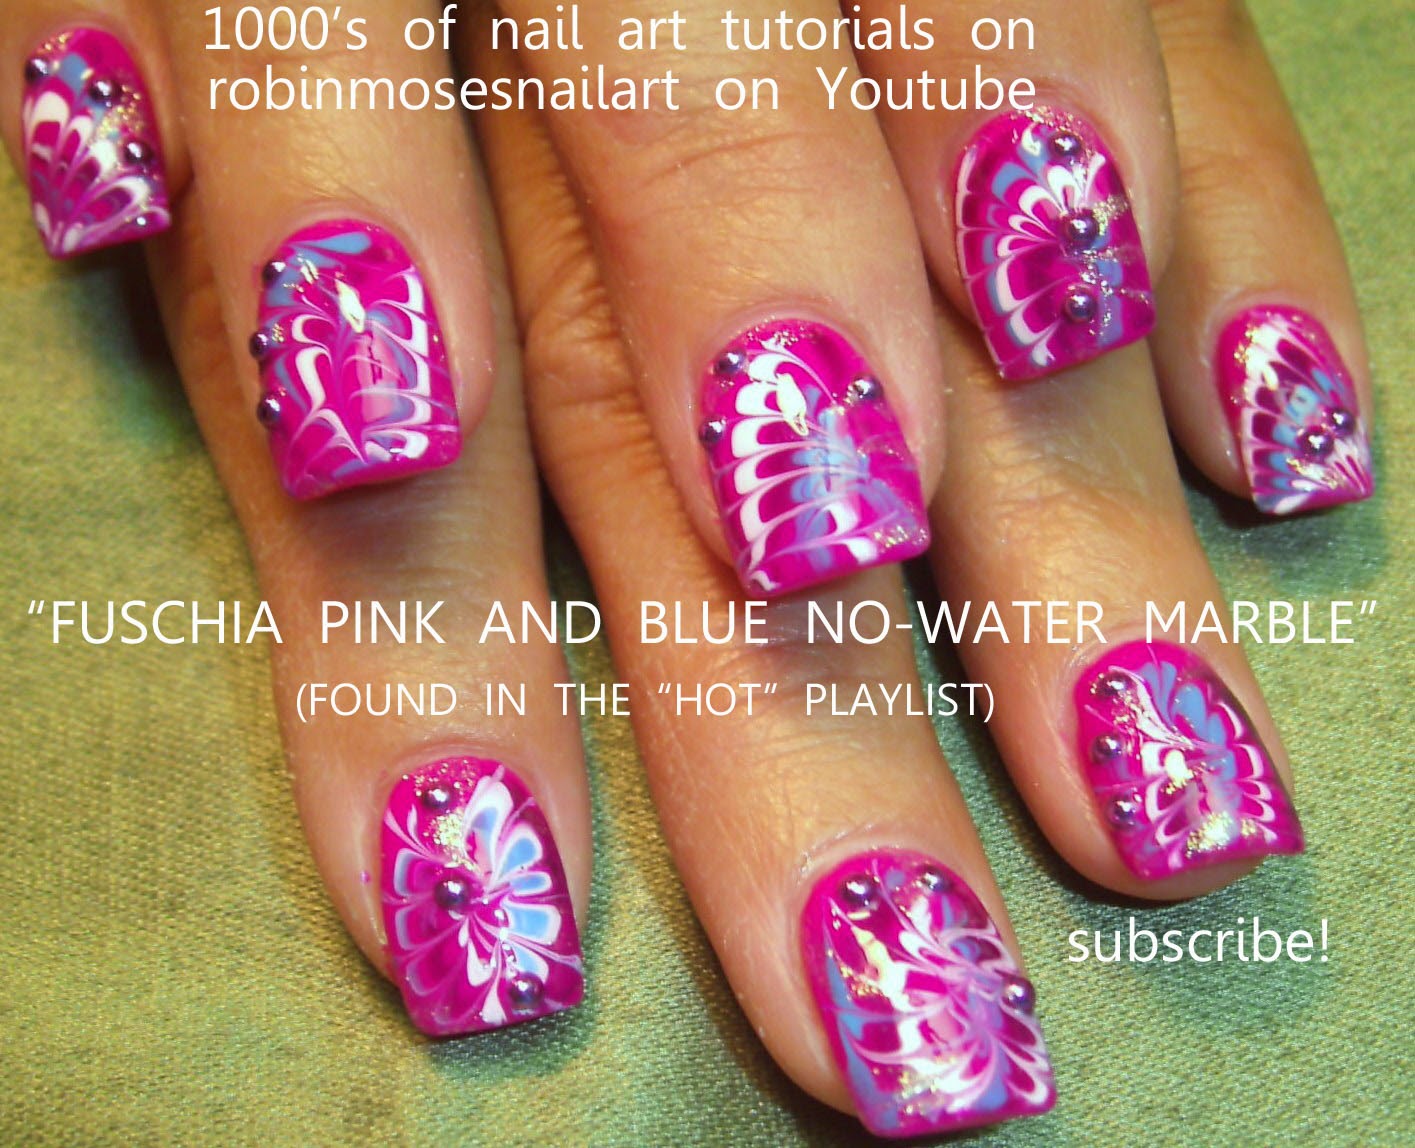 Marble Nail Art Without Water: Tips and Tricks - wide 7